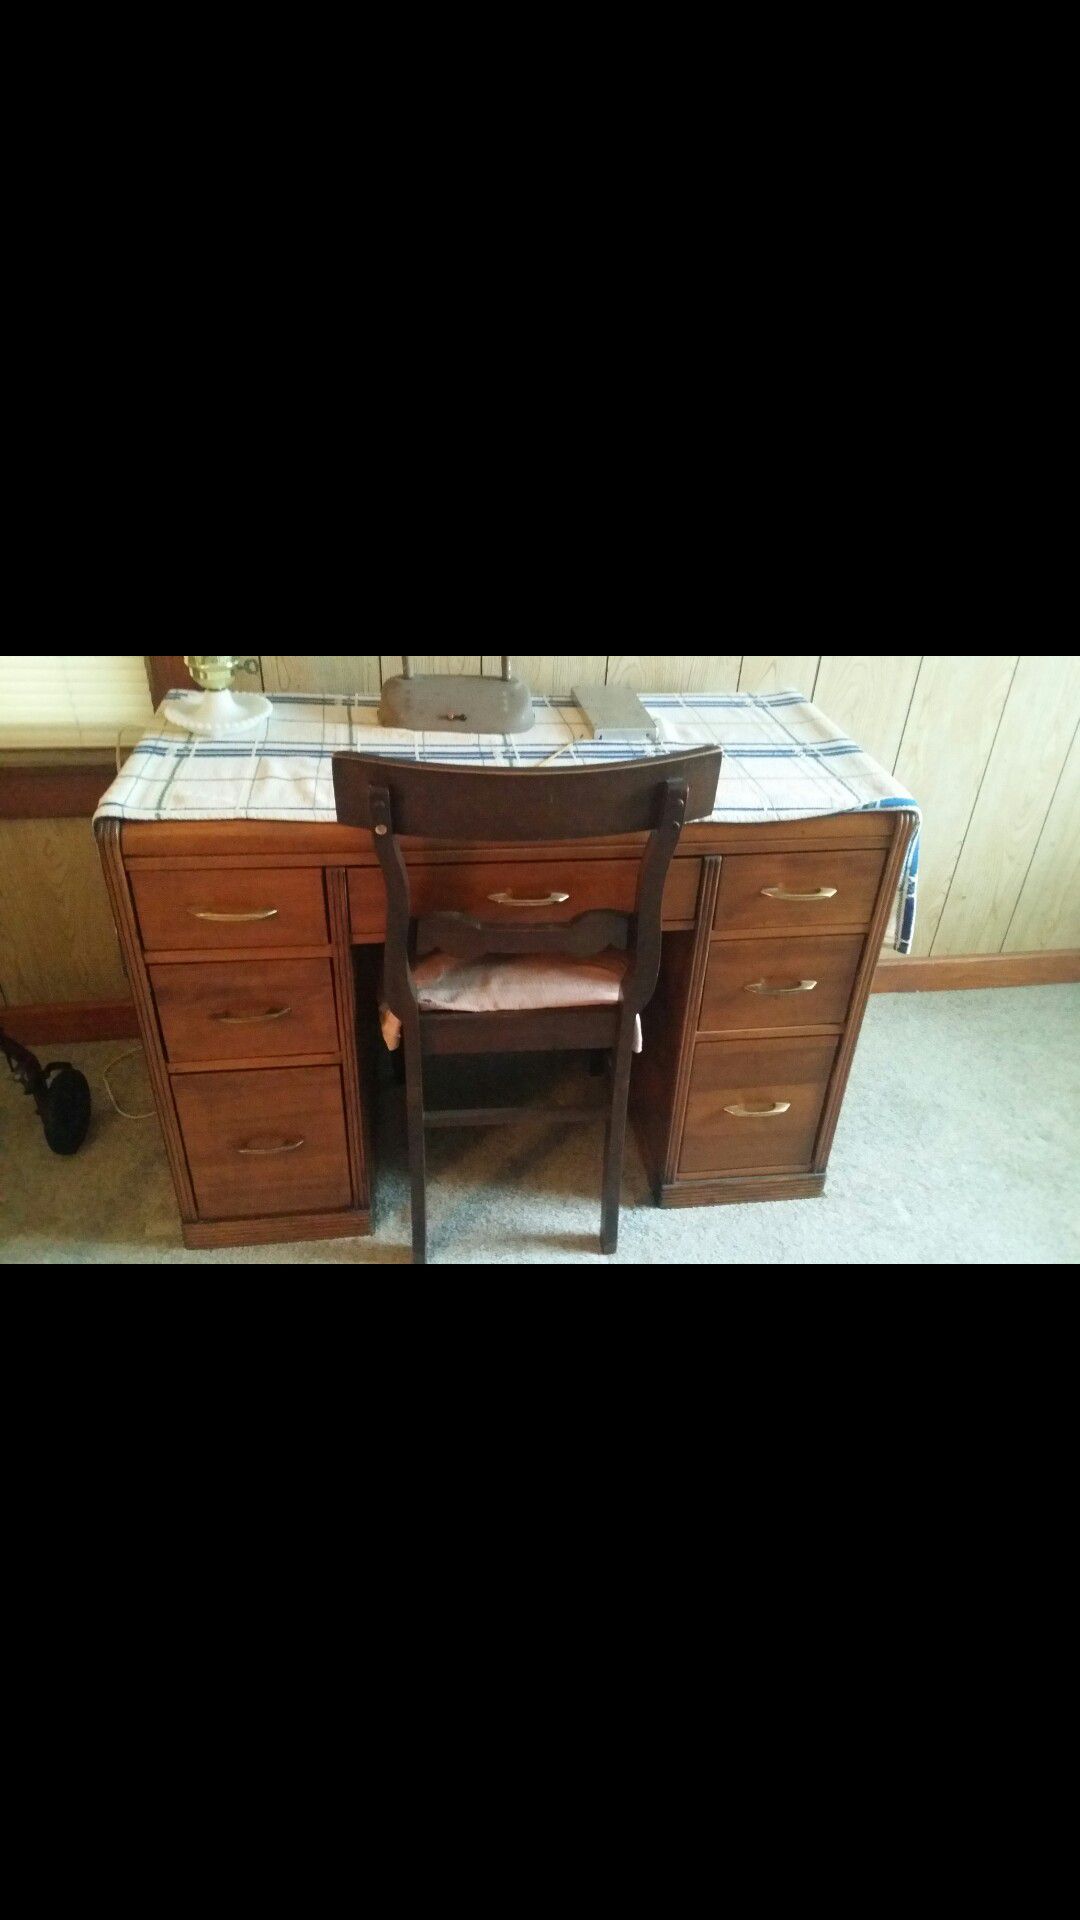 Desk with chair.